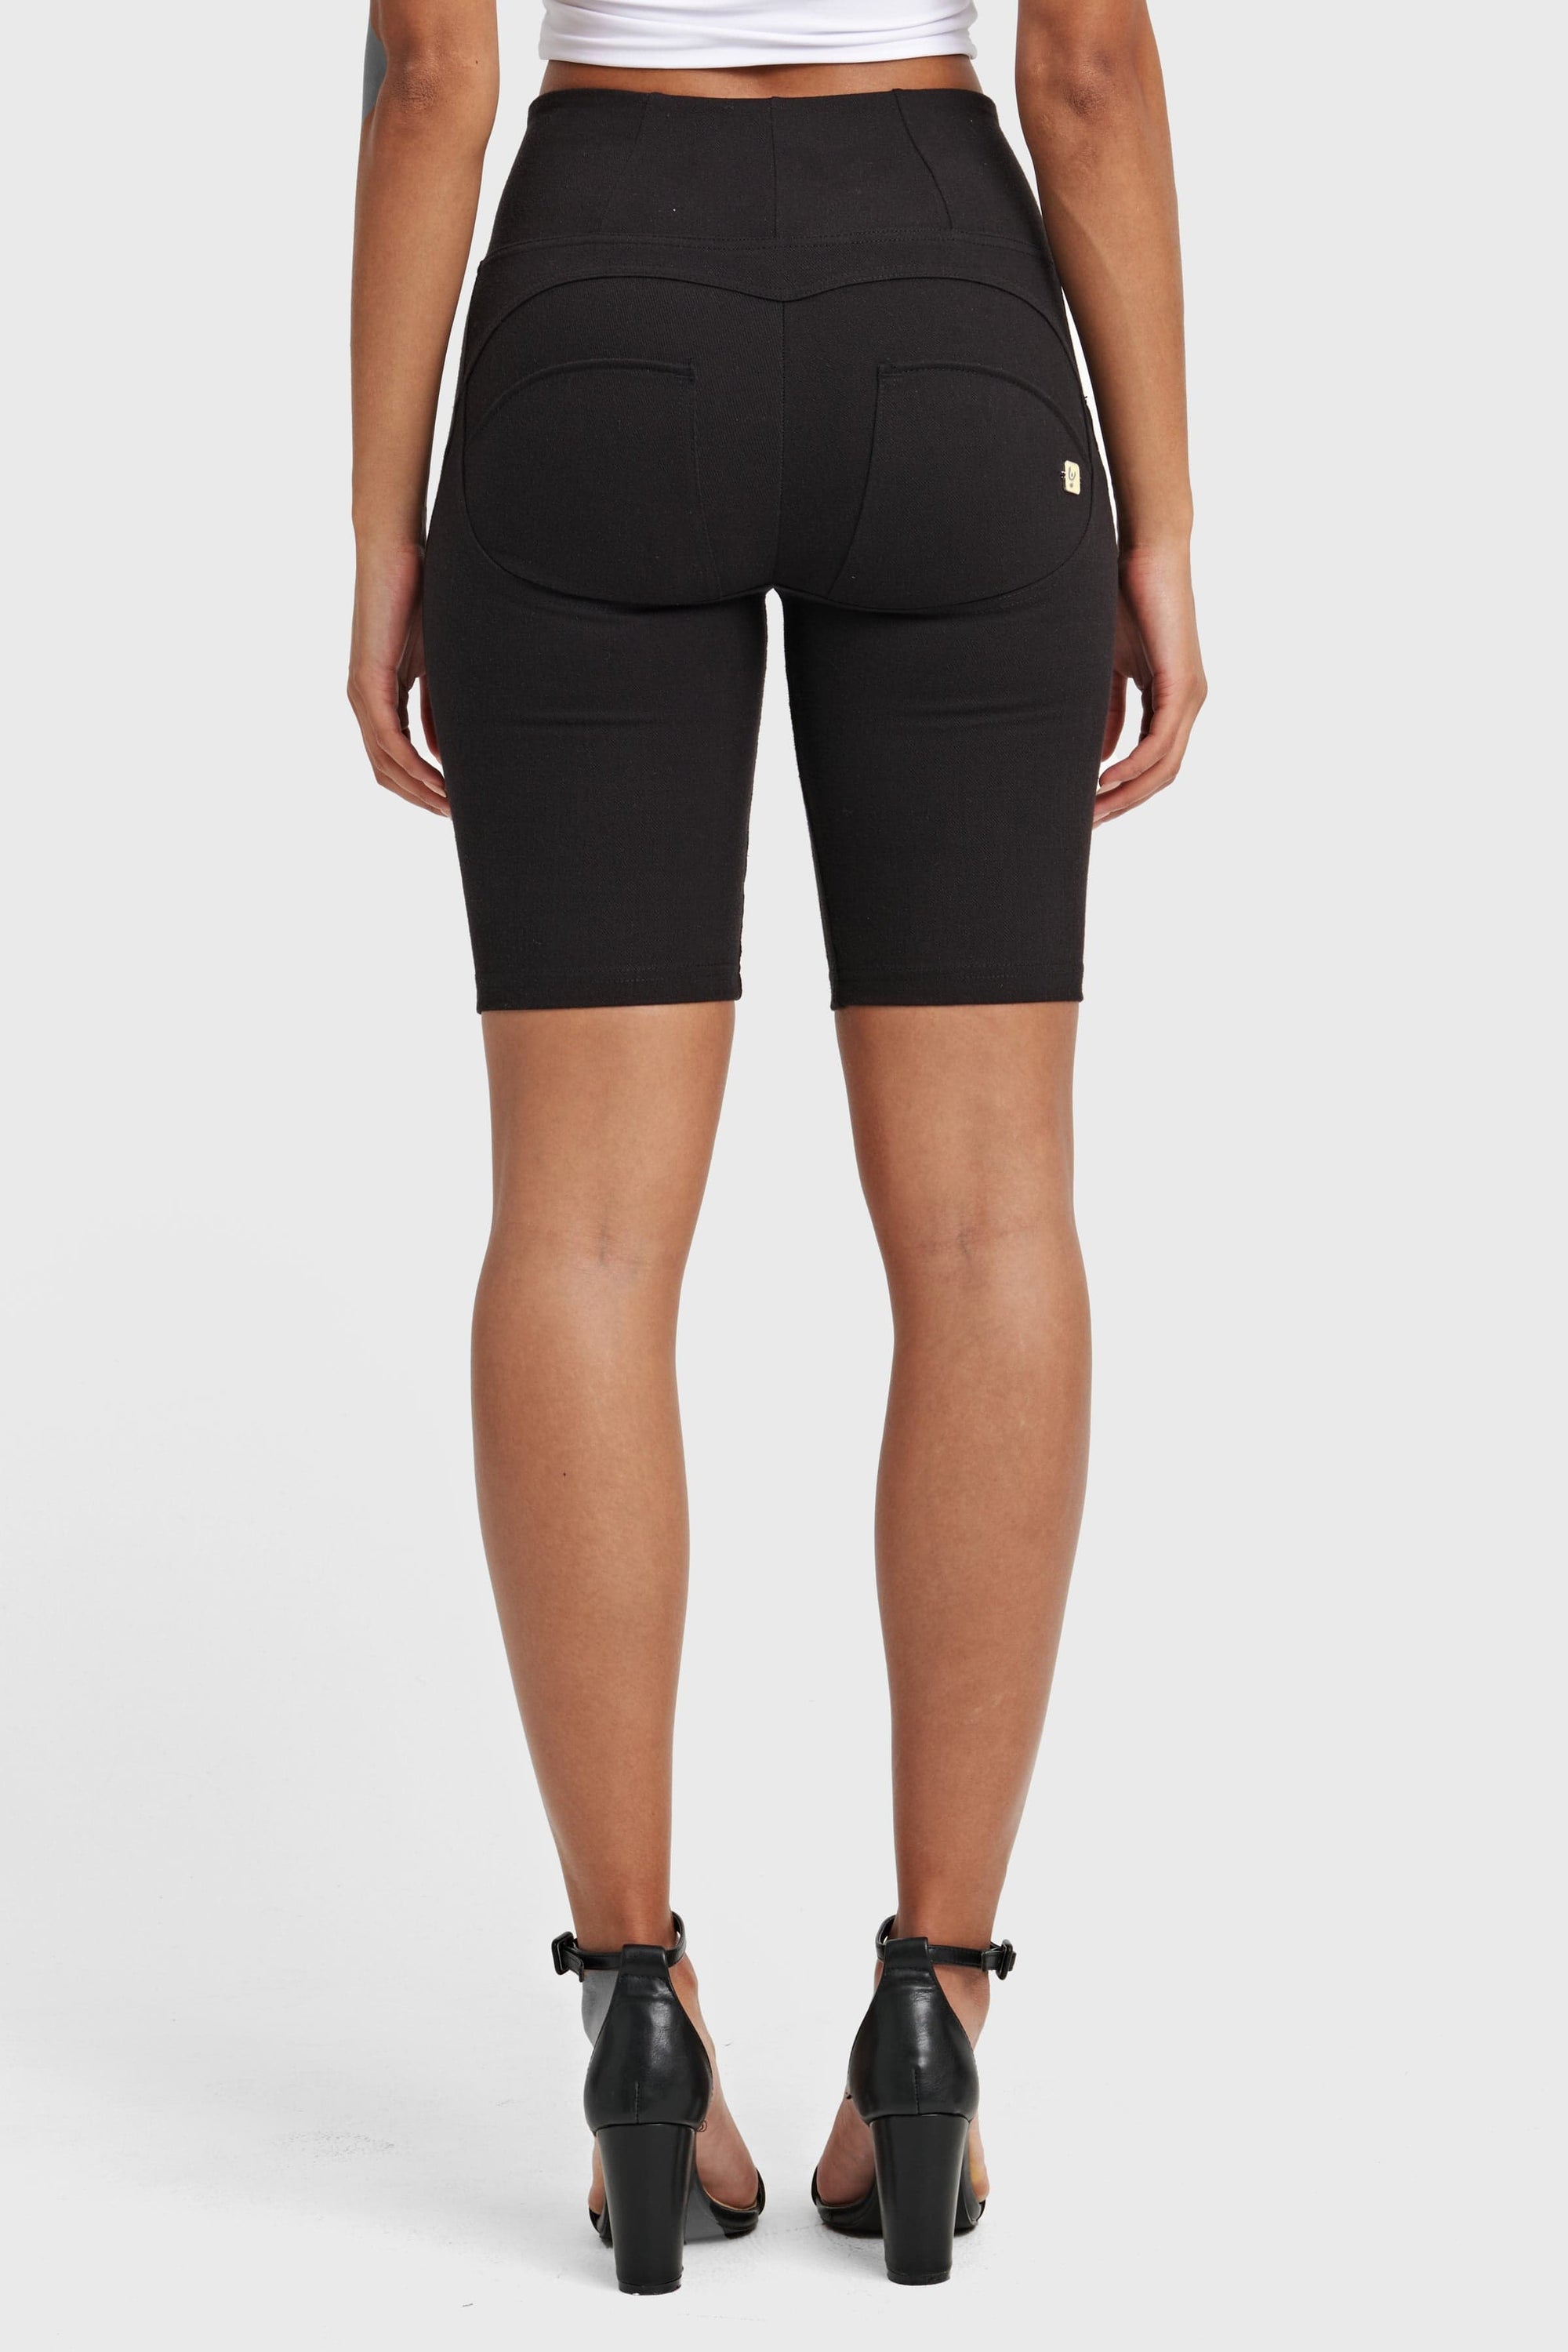 WR.UP® Drill Limited Edition - High Waisted - Biker Shorts - Black 6